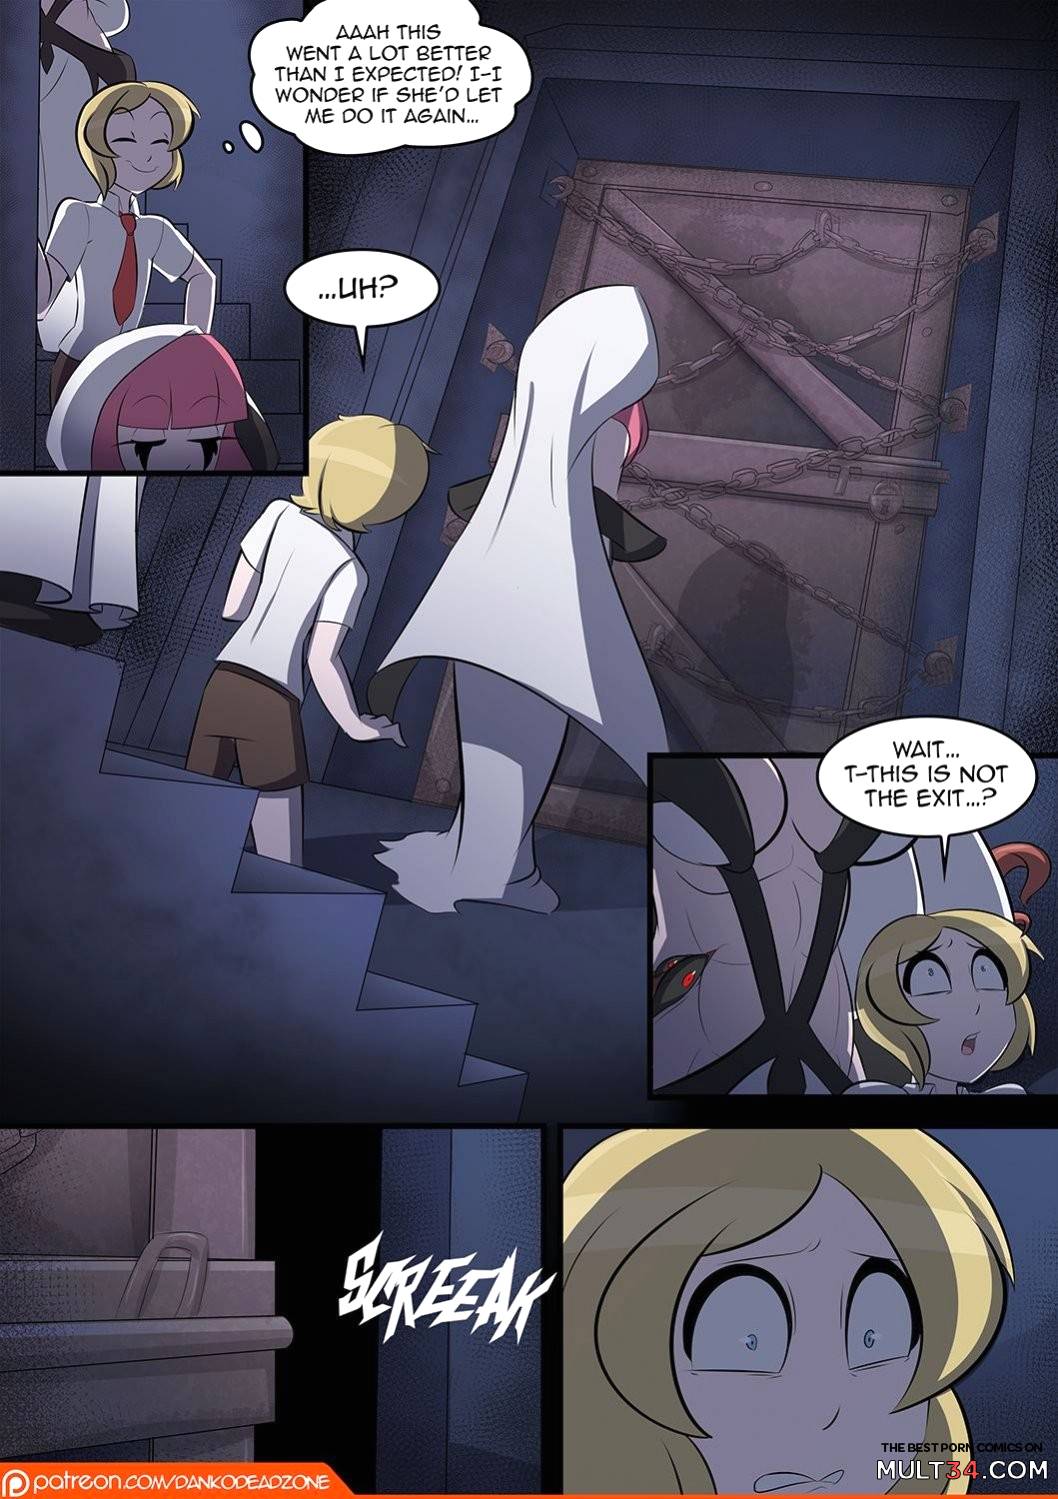 Lady of the Night - Issue 0 page 18